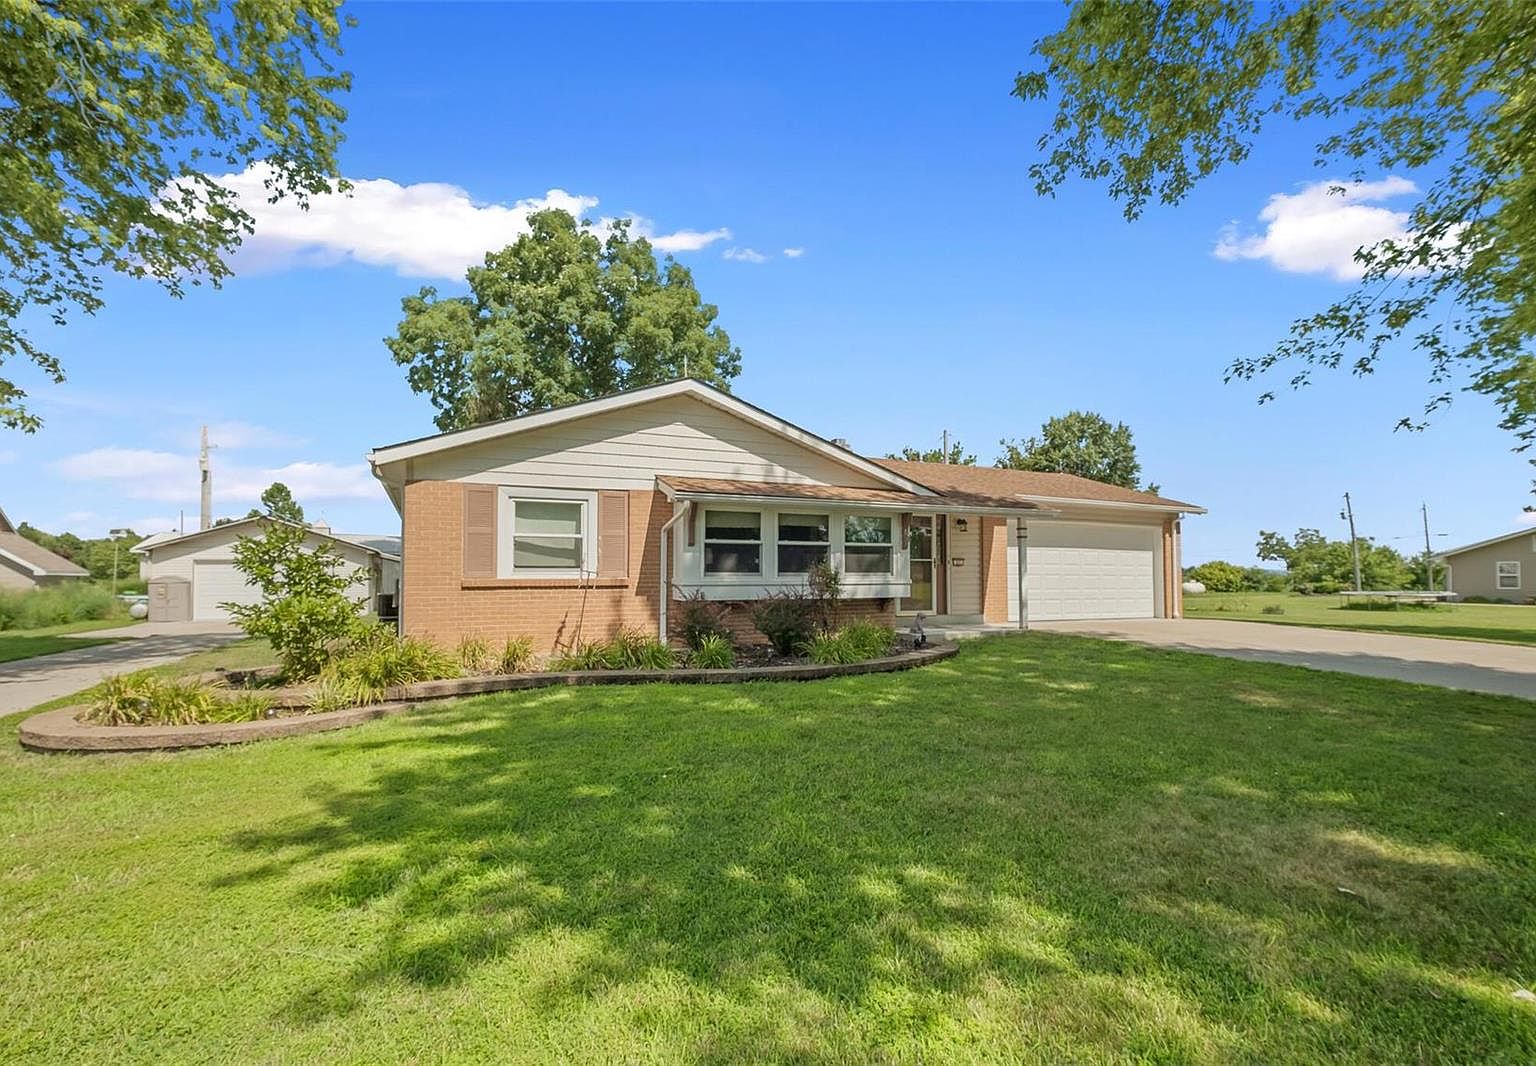 27 Kennedy St, Portage Des Sioux, MO 63373 | Zillow